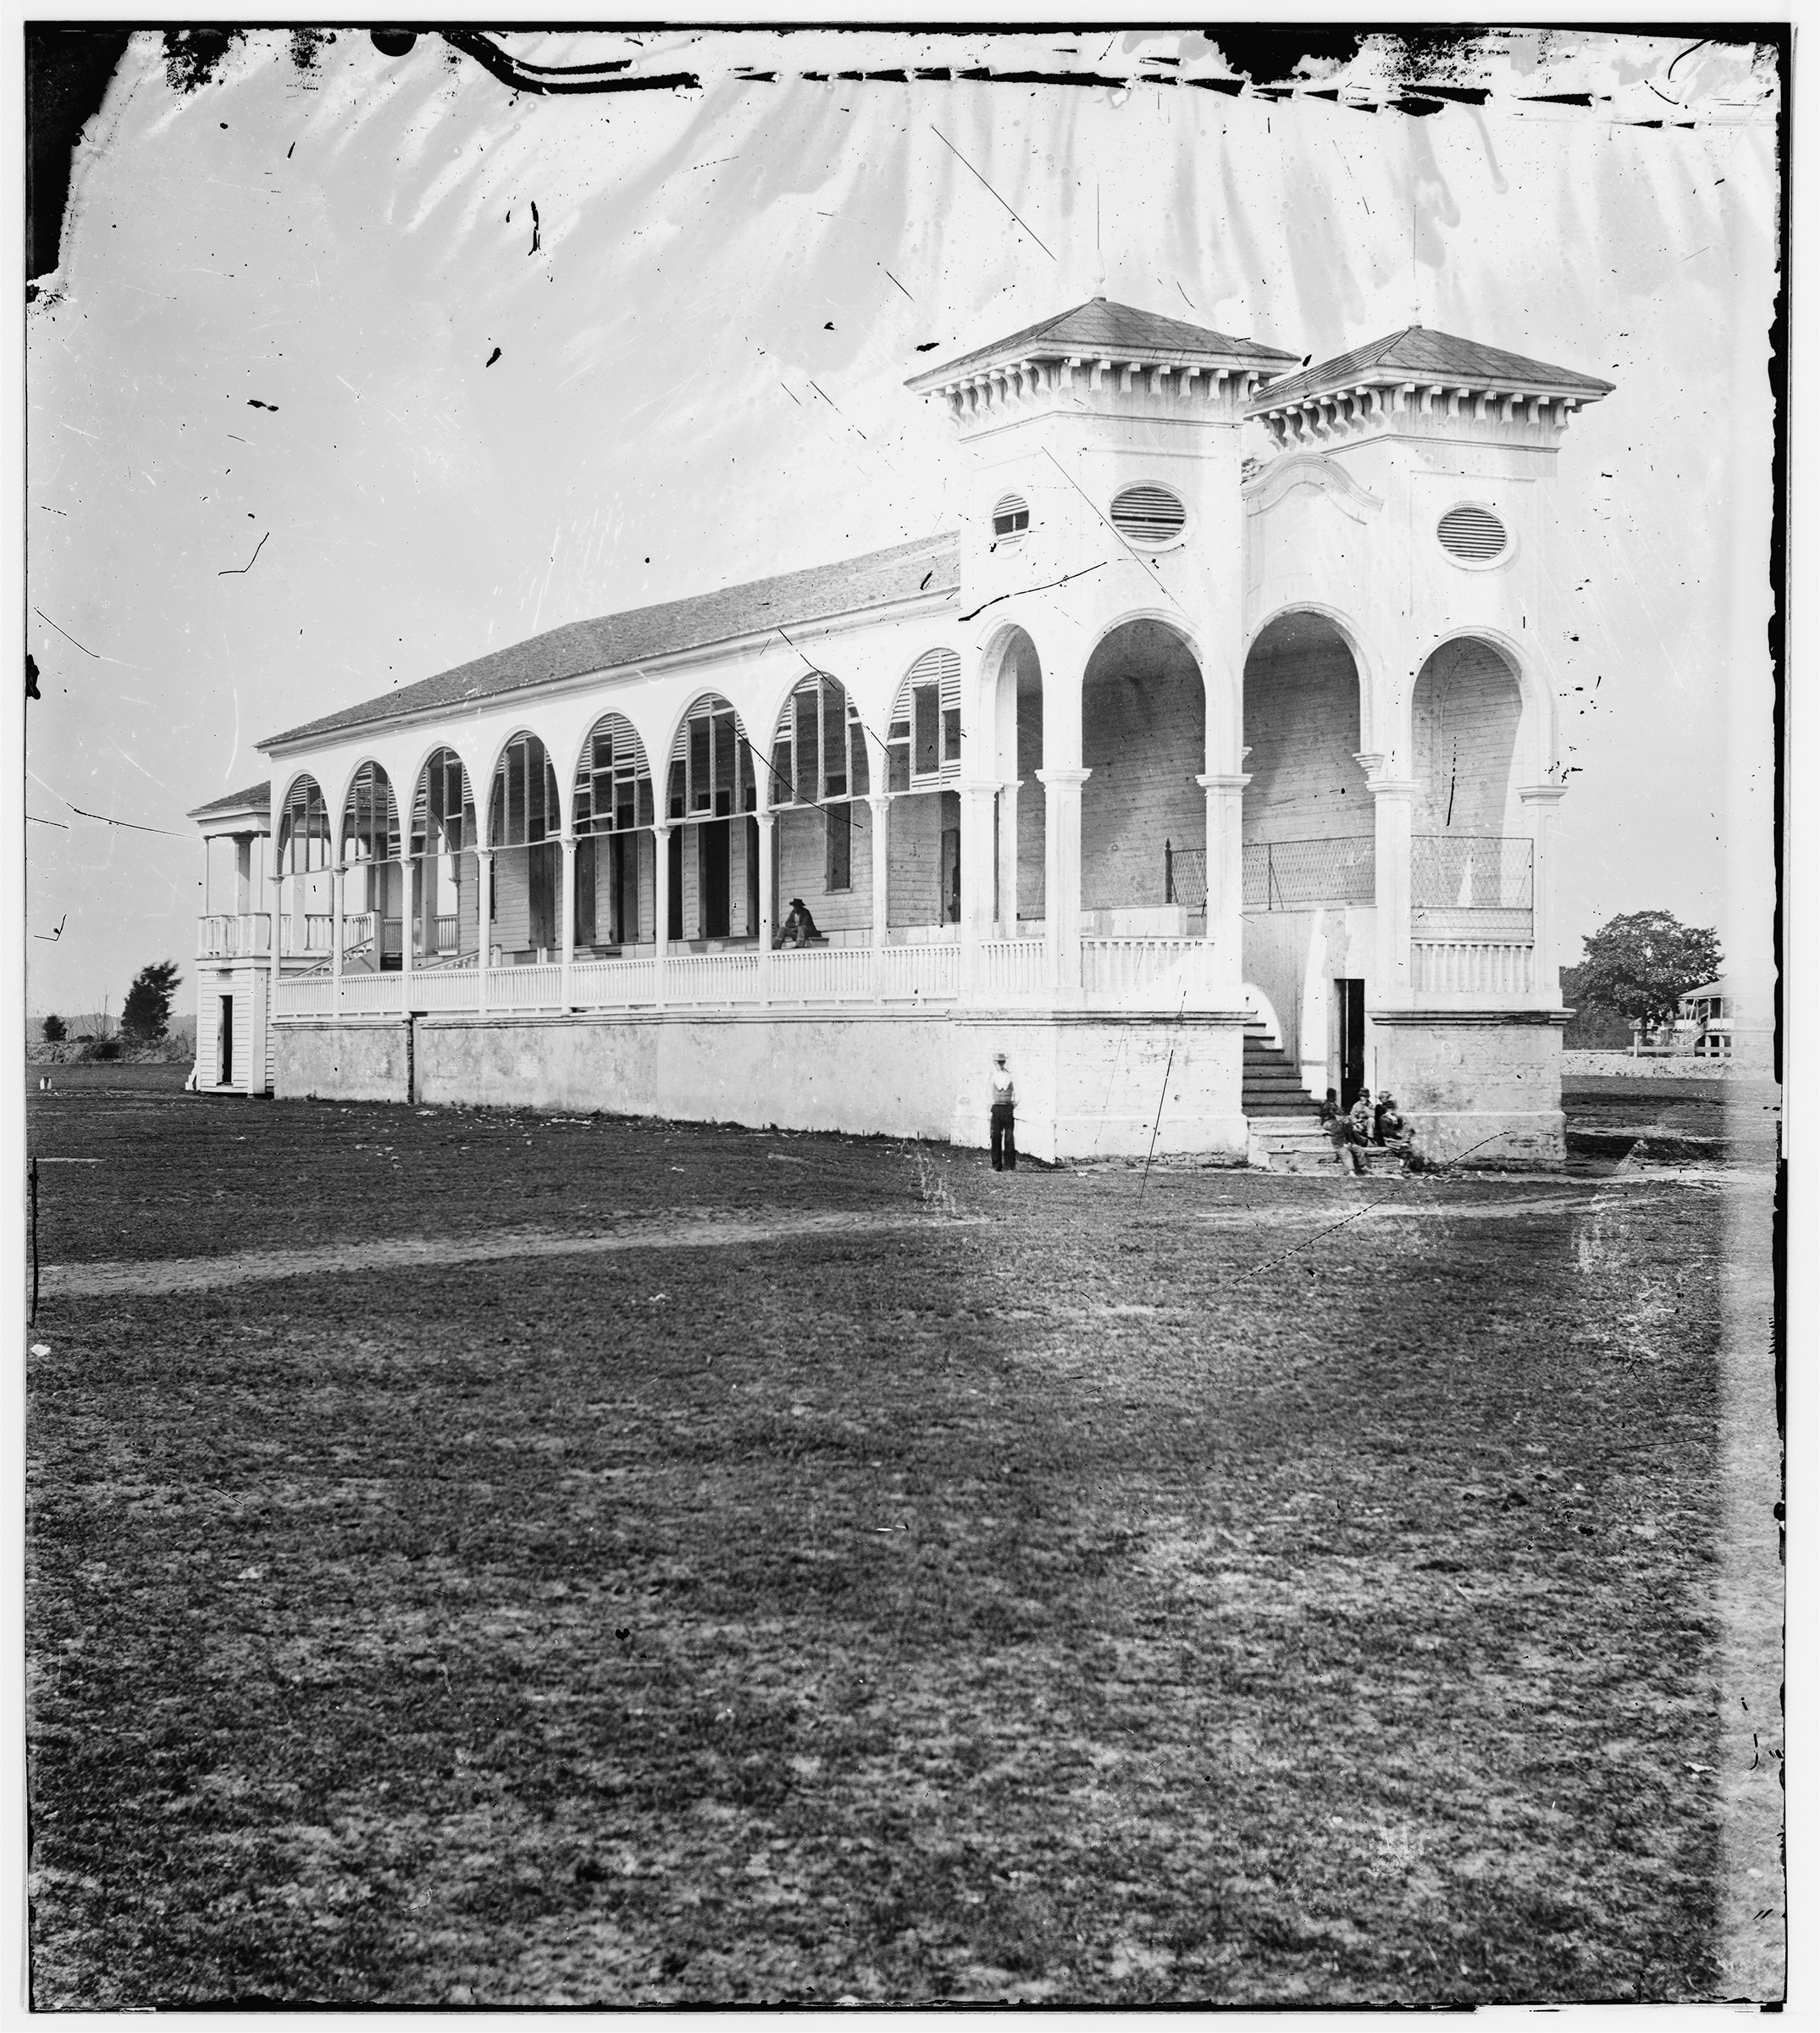 Clubhouse at the race course where Union soldiers were held prisoner. (Civil war photographs, 1861-1865, Library of Congress, Prints and Photographs Division.)